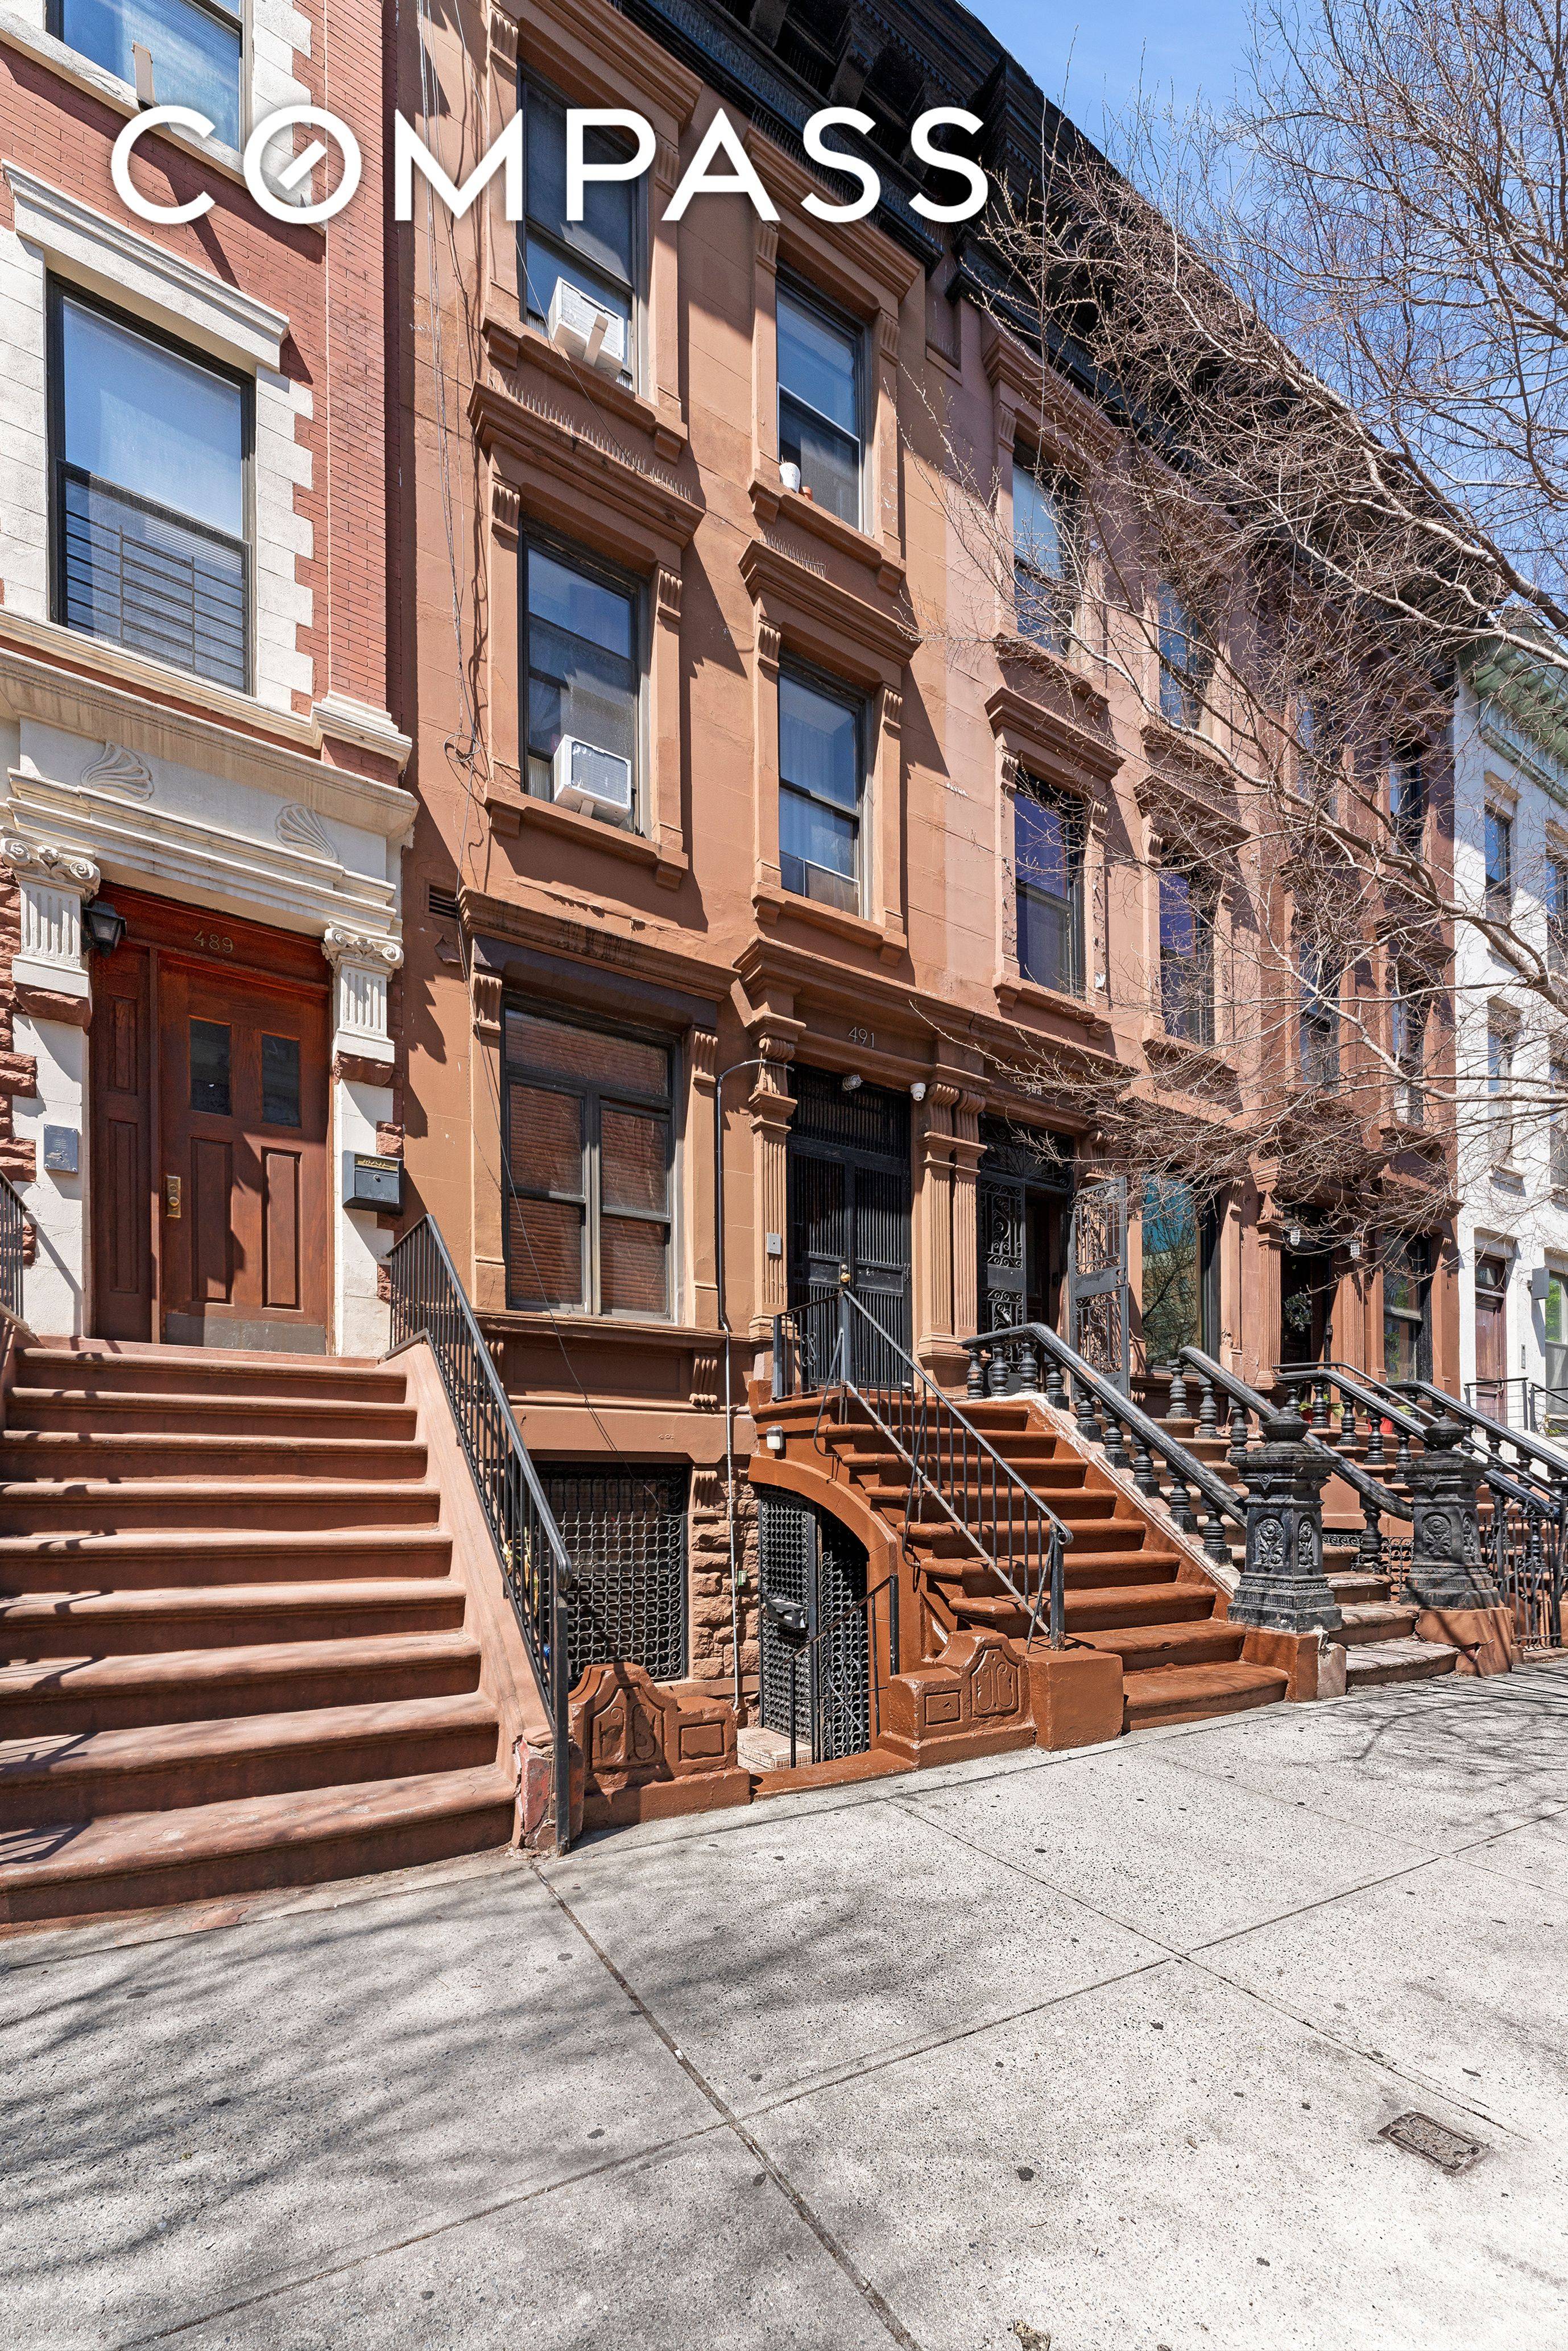 491 Manhattan Avenue is a 3 story apartment building located on a tree lined street in South Harlem.